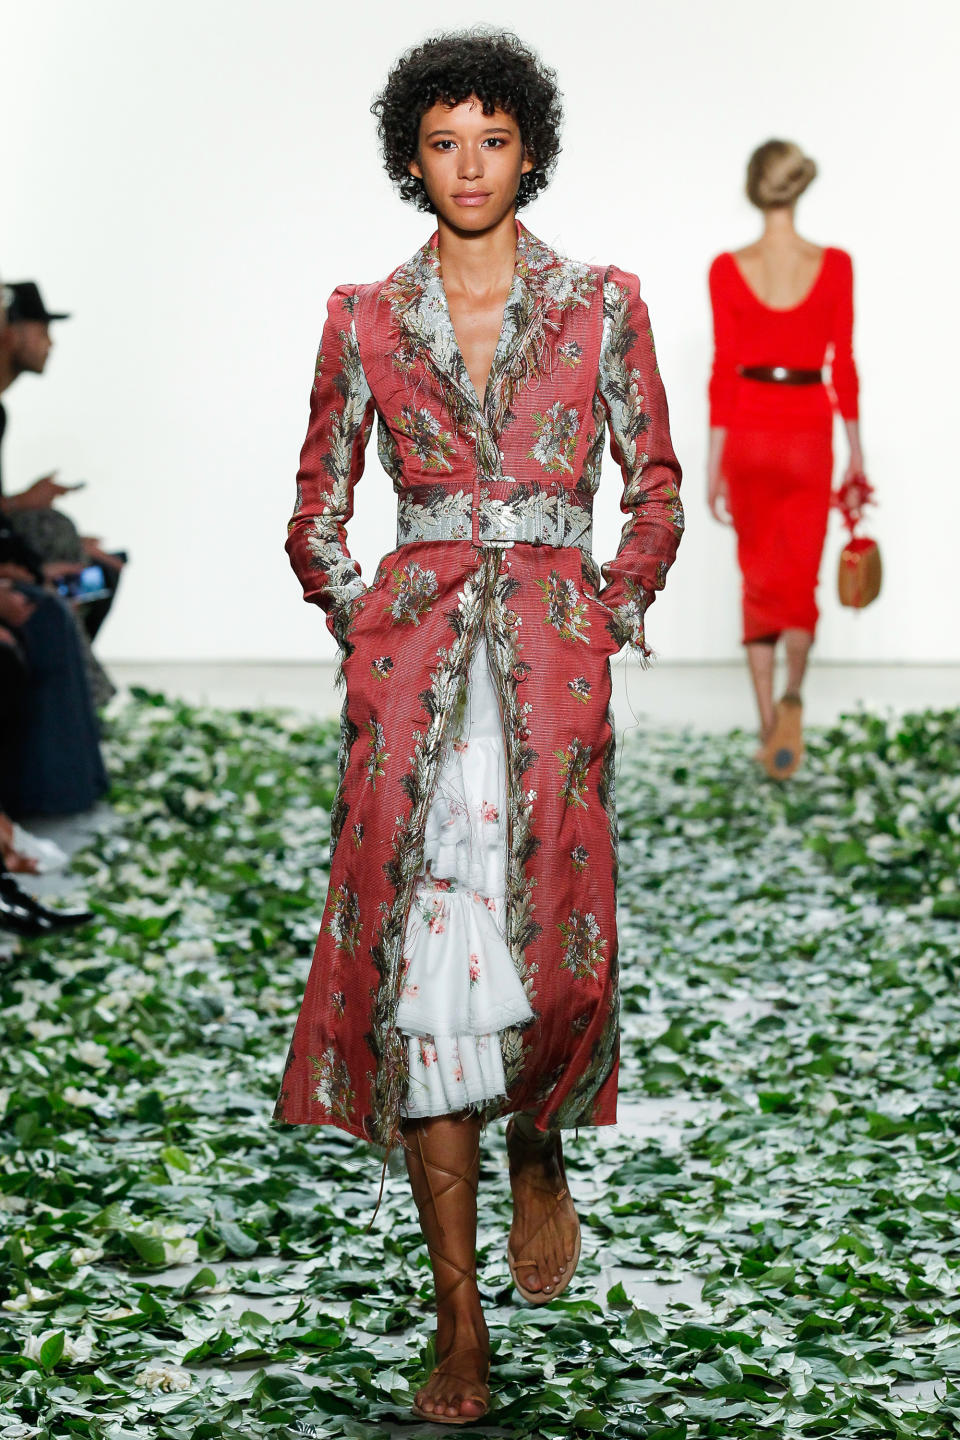 <p>The up-and-coming model made a splash during Brock's NYFW show in a floral dress and belted coat.</p>